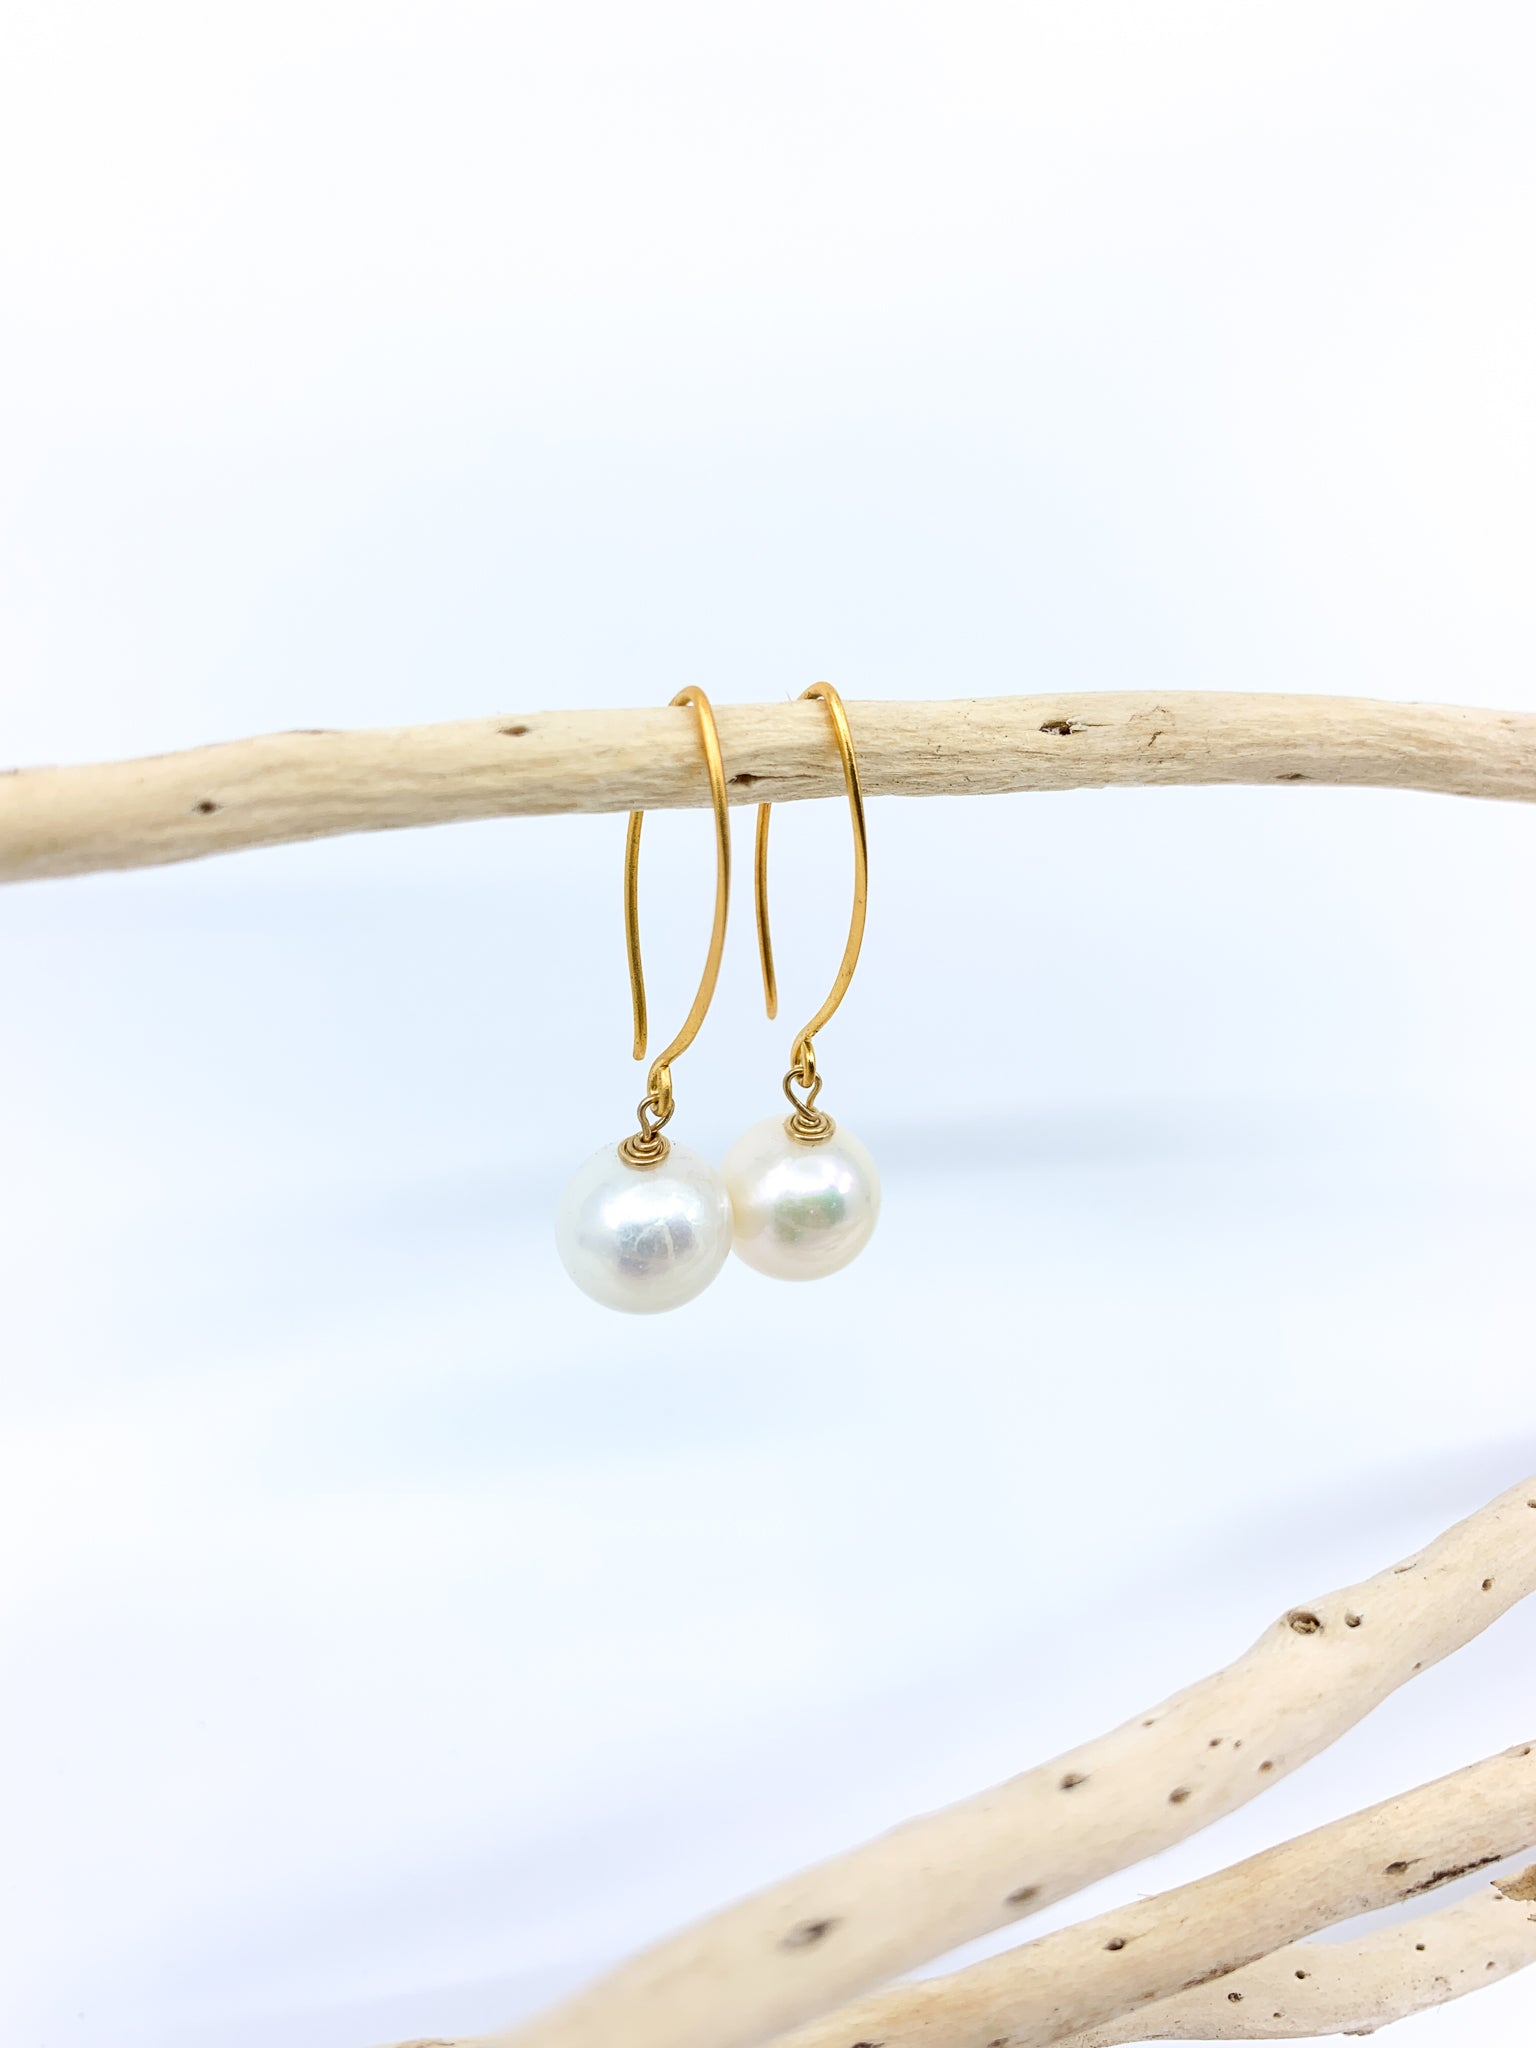 white pearl earrings short gold hook by eve black jewelry made in Hawaii